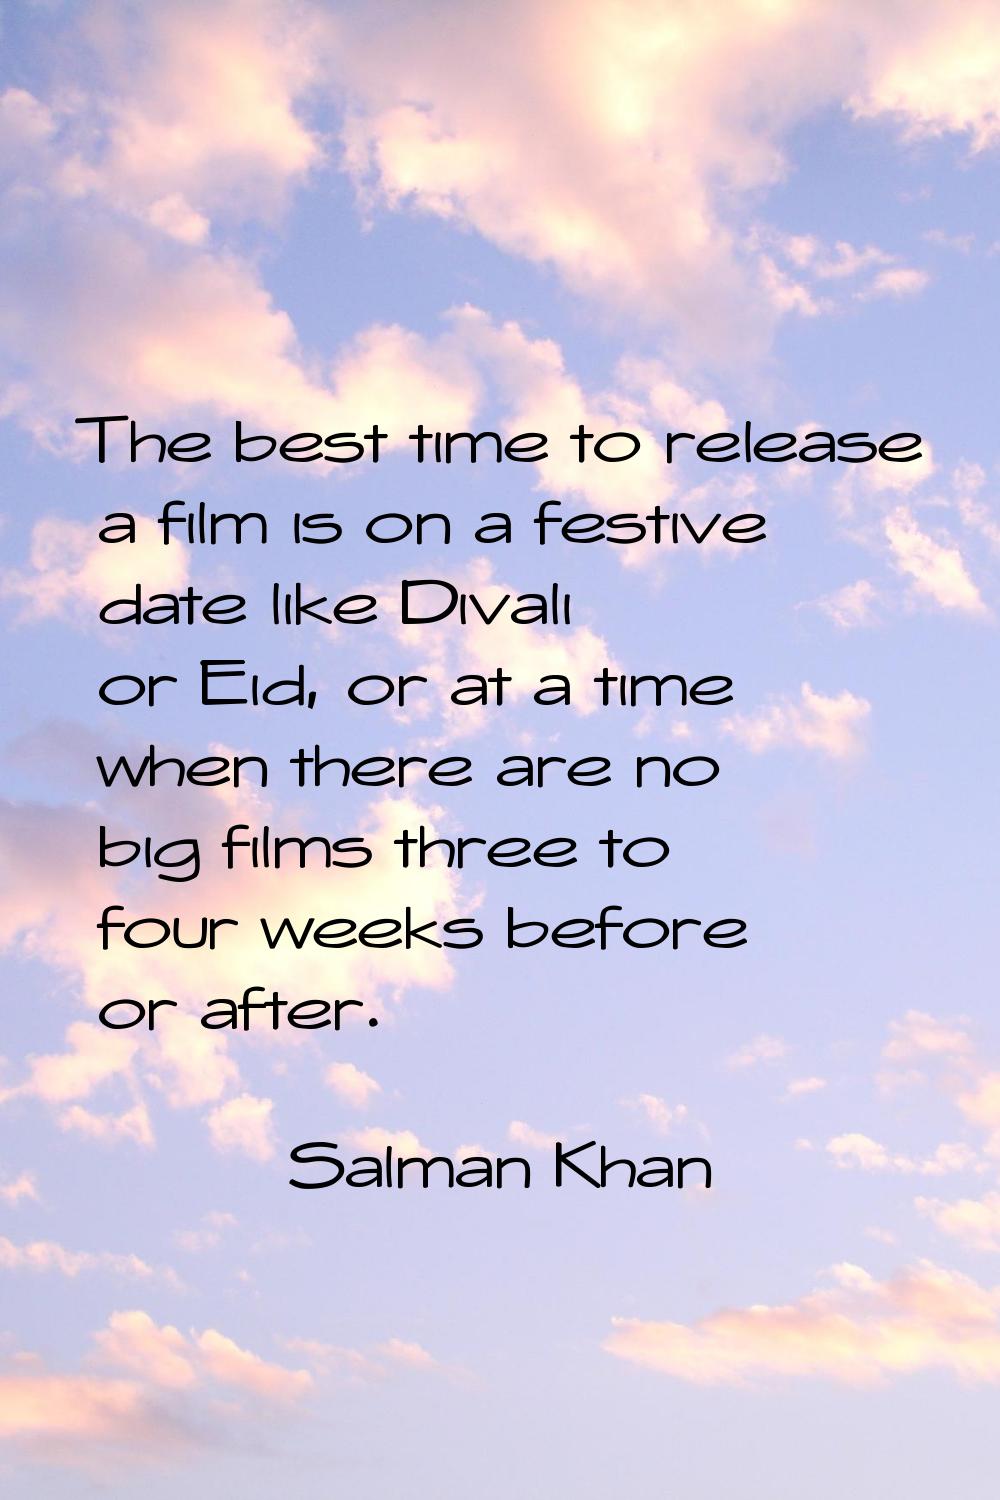 The best time to release a film is on a festive date like Divali or Eid, or at a time when there ar